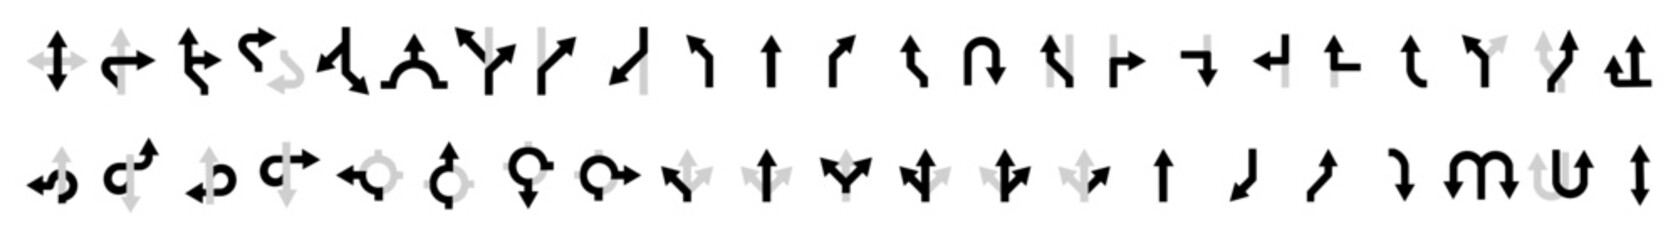 Path or direction on arrows sign collage. Road navigation arrows on a white background. Vector black line branching road arrow. Marking the direction of movement, the location of the intersection poin